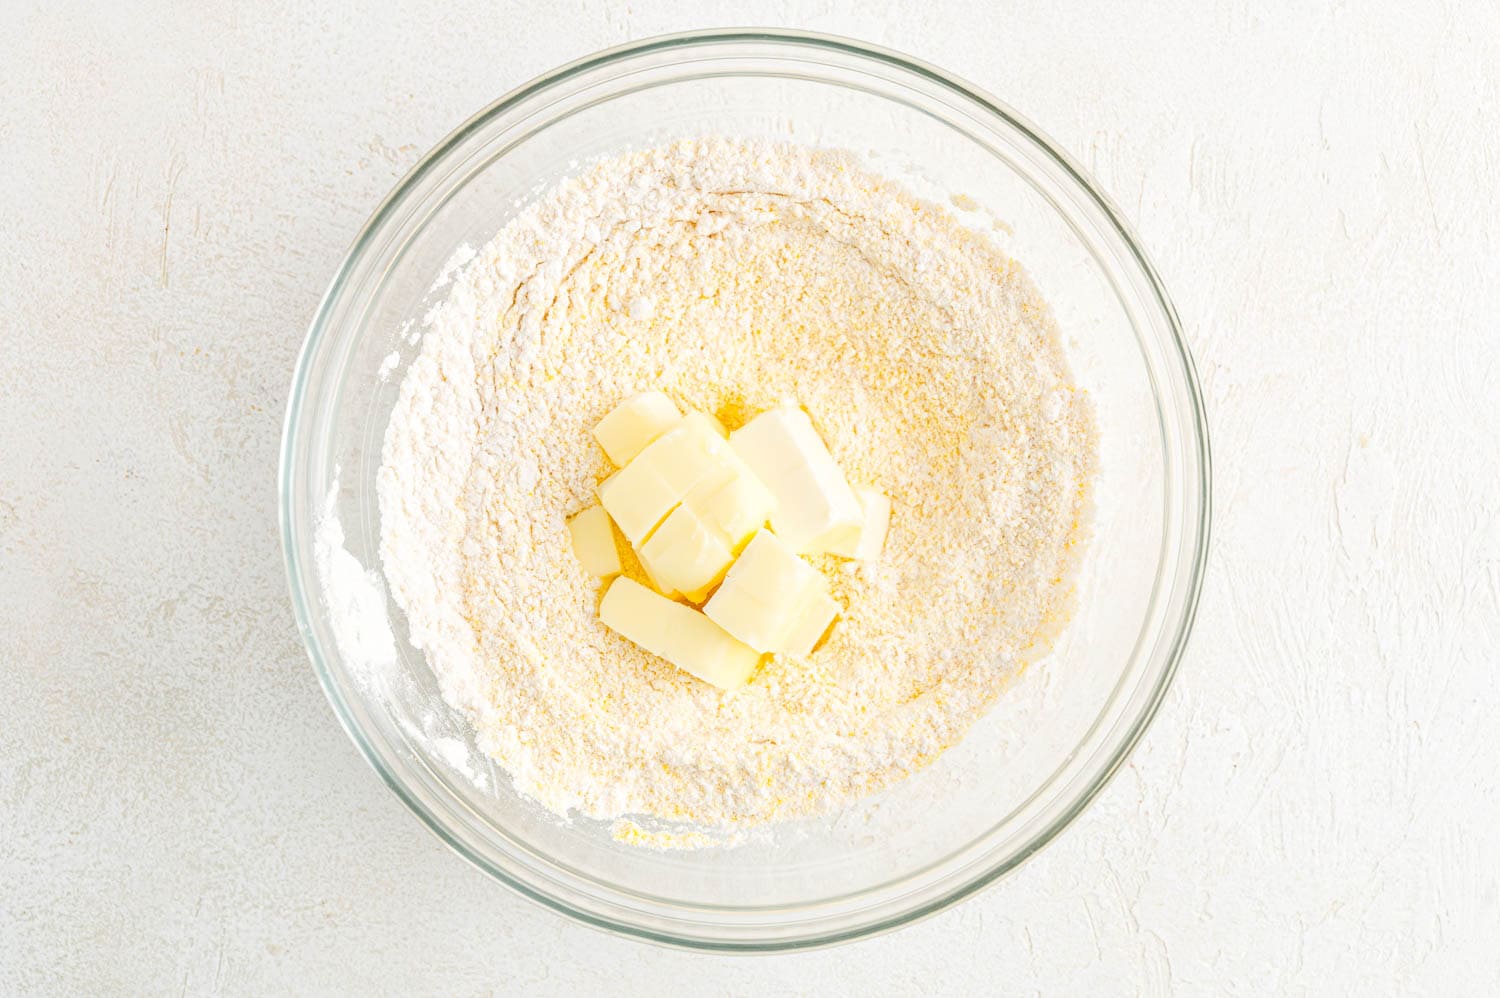 Butter added to dry ingredients.